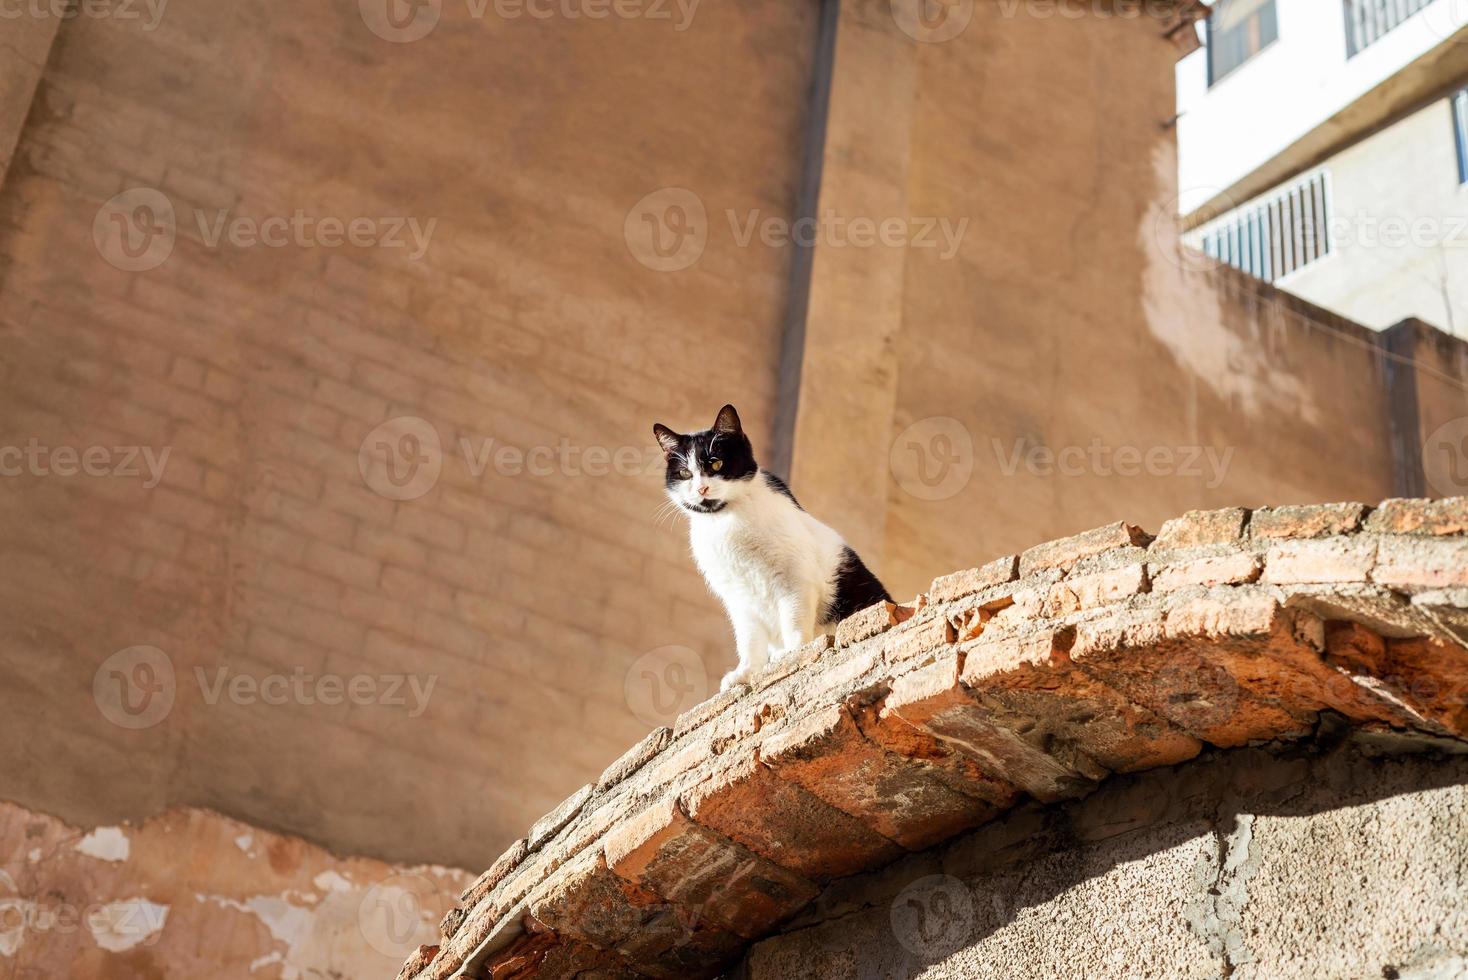 black and white cat siting on a brick roof on a sunny day photo